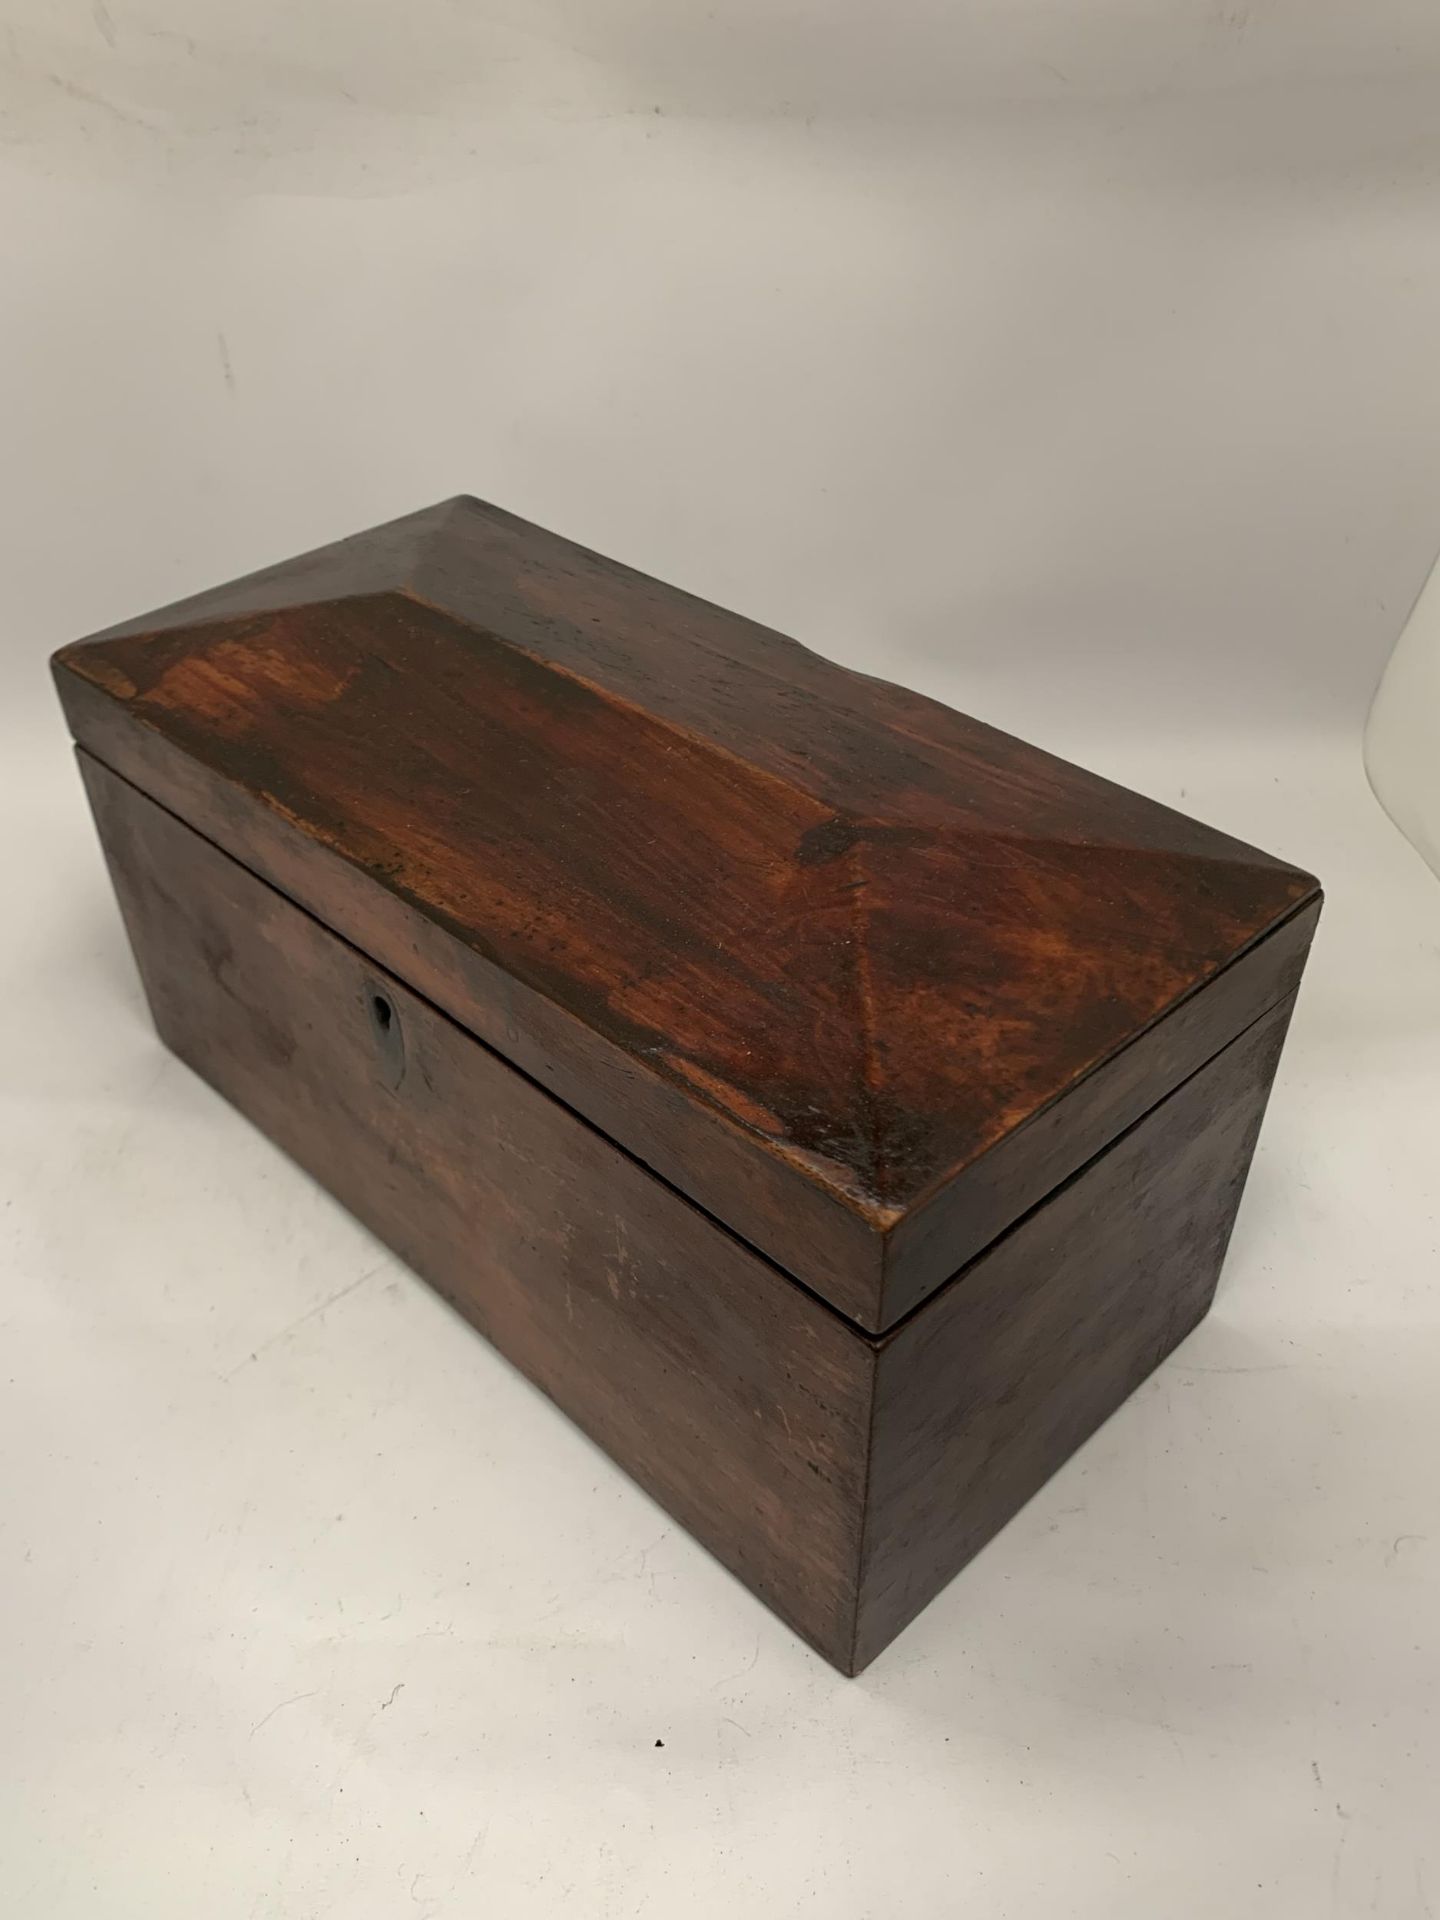 A VINTAGE MAHOGANY TEA CADDY WITH TWO INNER COMPARTMENTS - Image 3 of 3